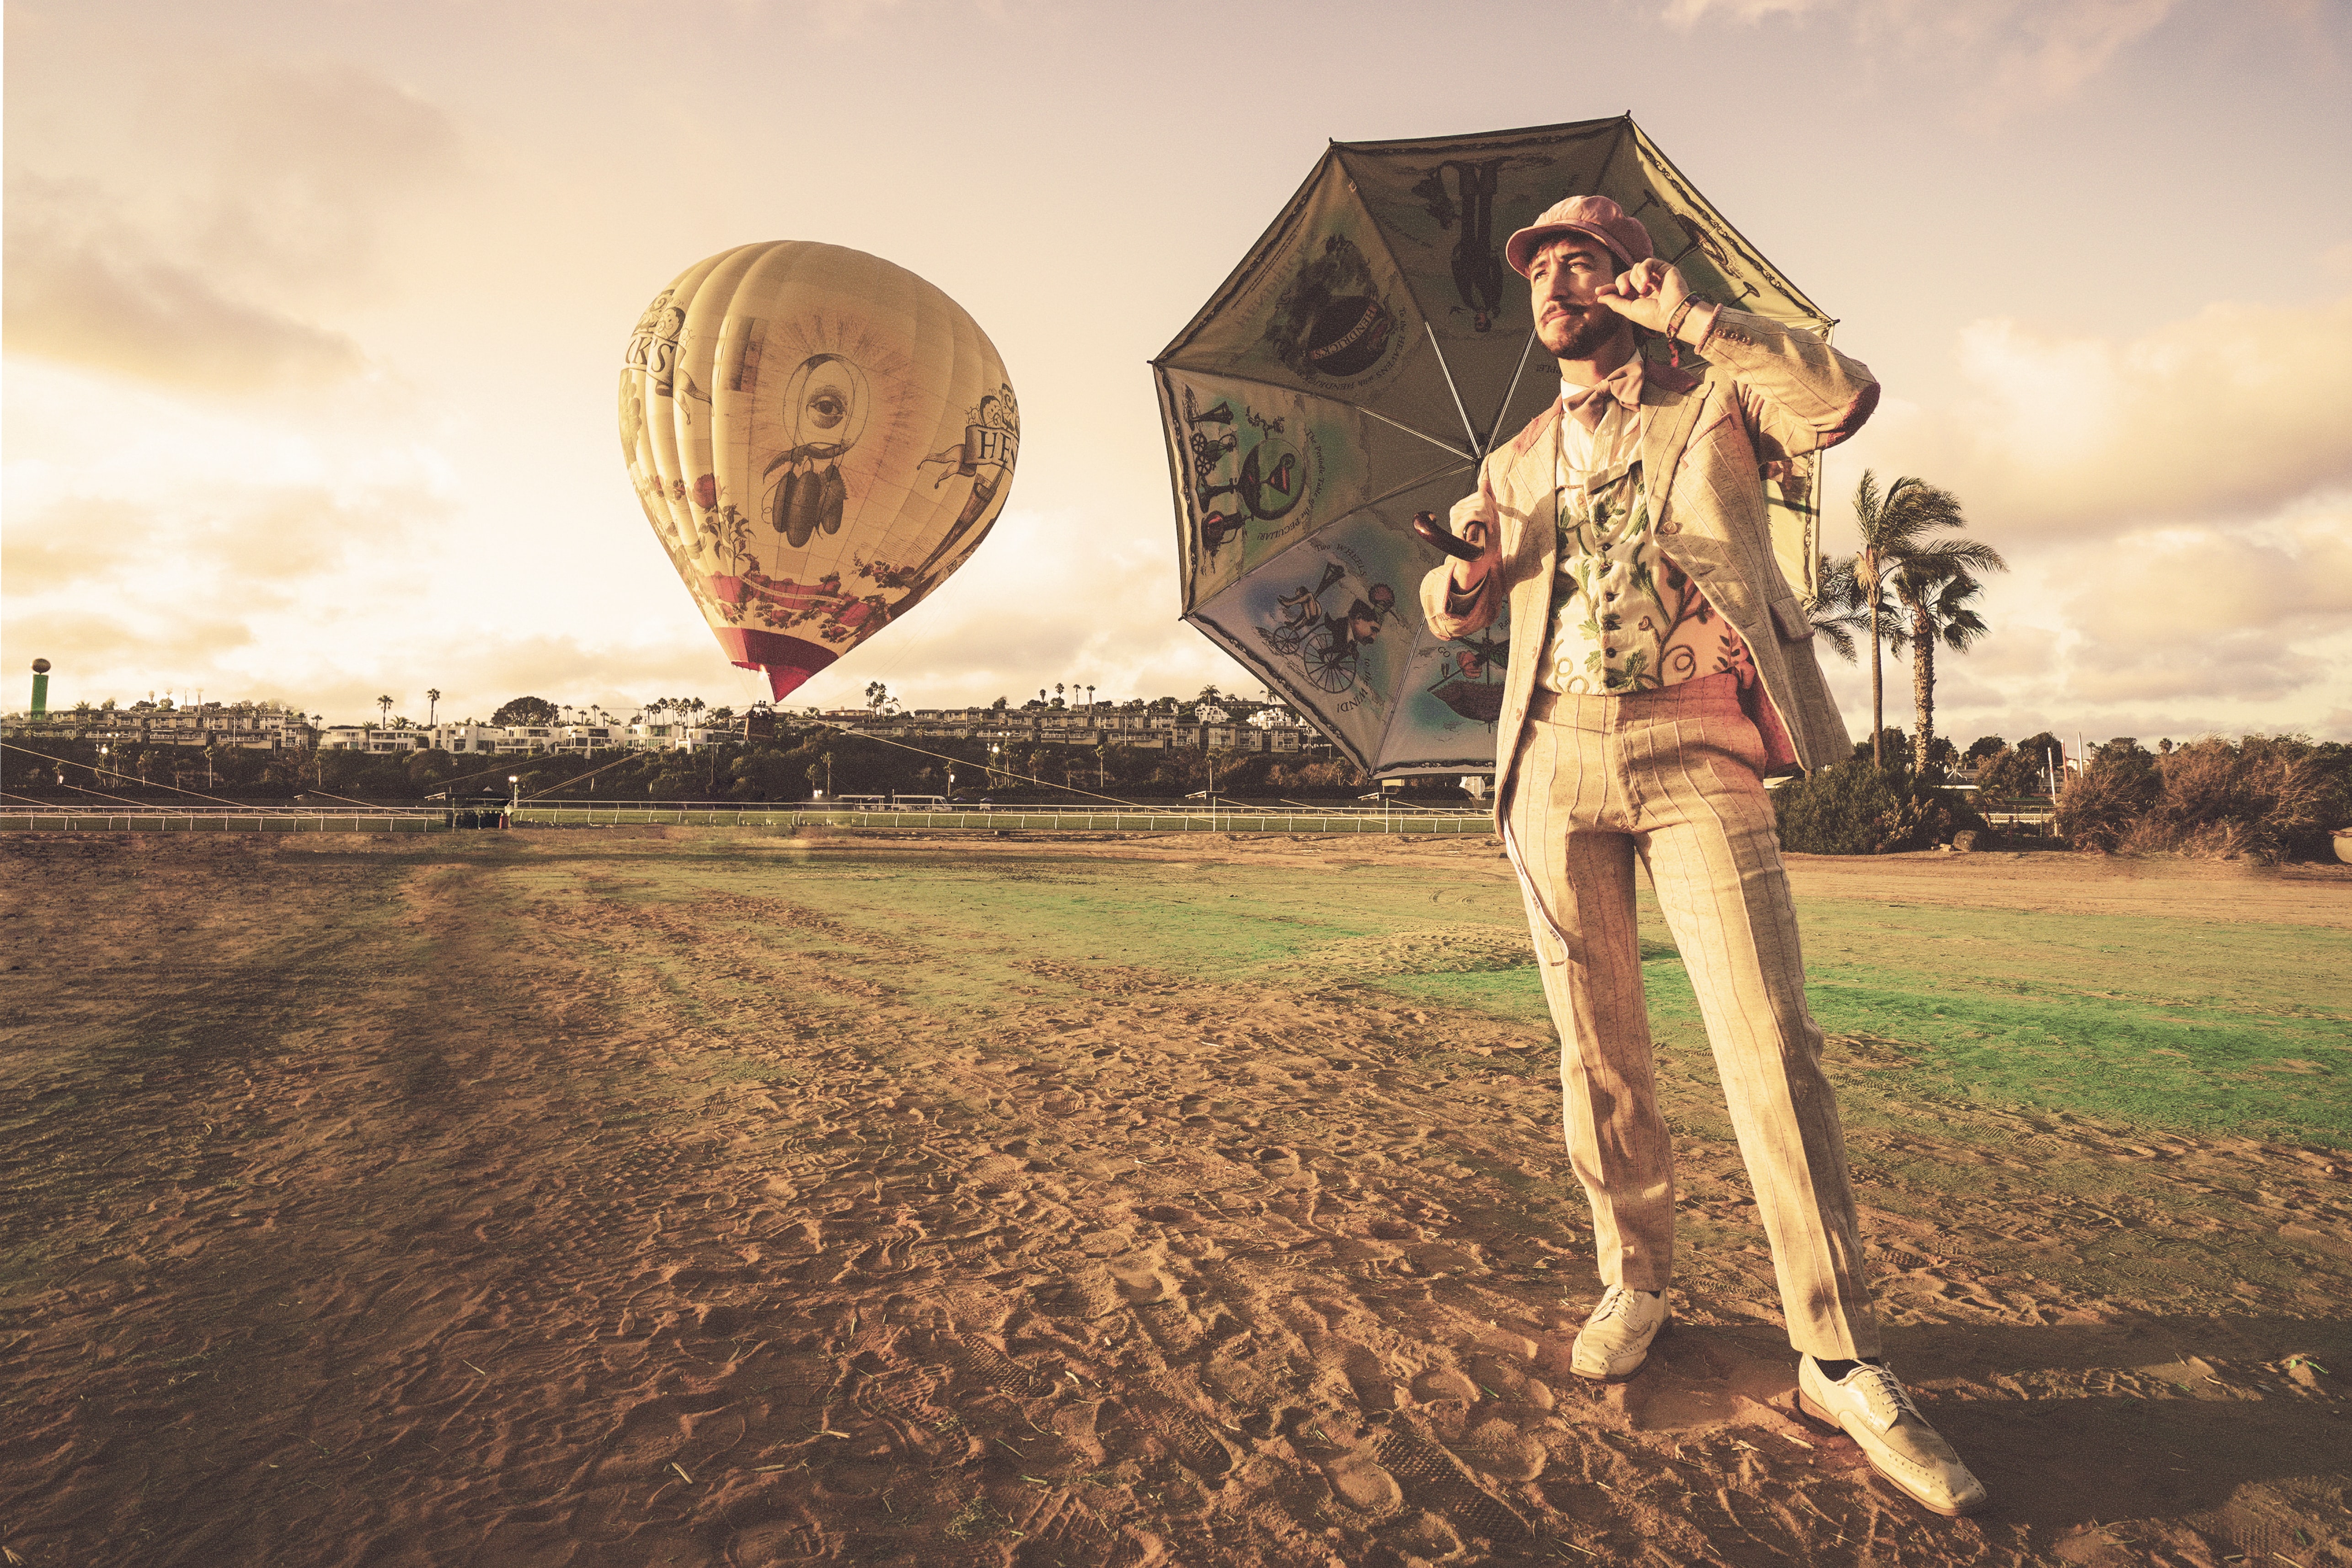 A man in a white suit stands underneath an ornate white umbrella while standing in a dirt field. A white hot air balloon hovers near the ground behind him.